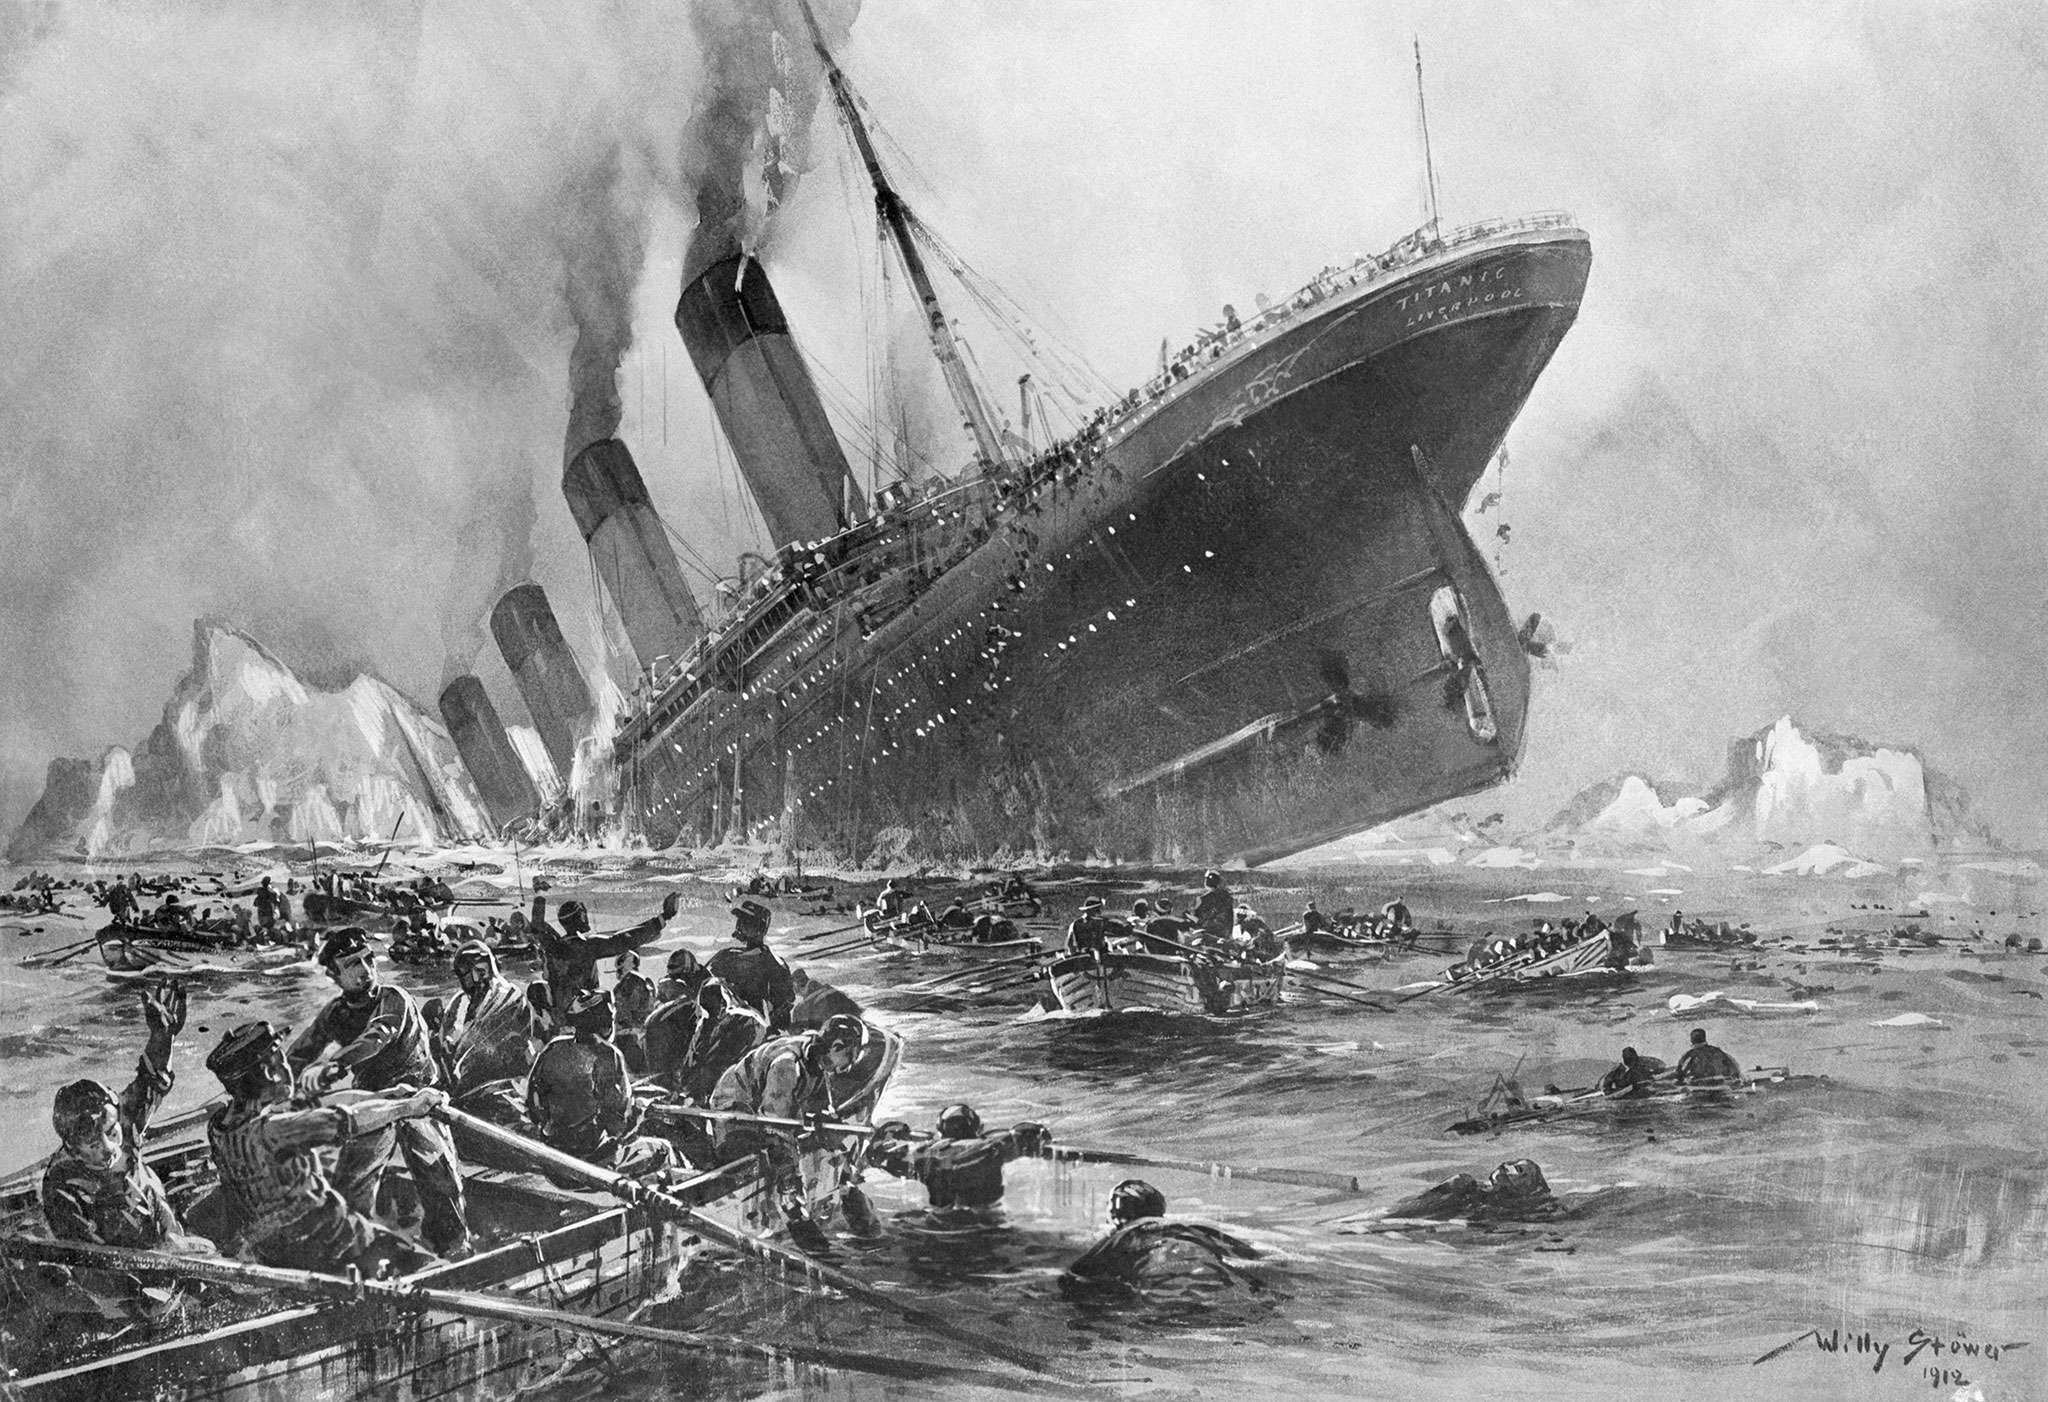 1912 'Unsinkable' Titanic, largest man-made structure, sinks